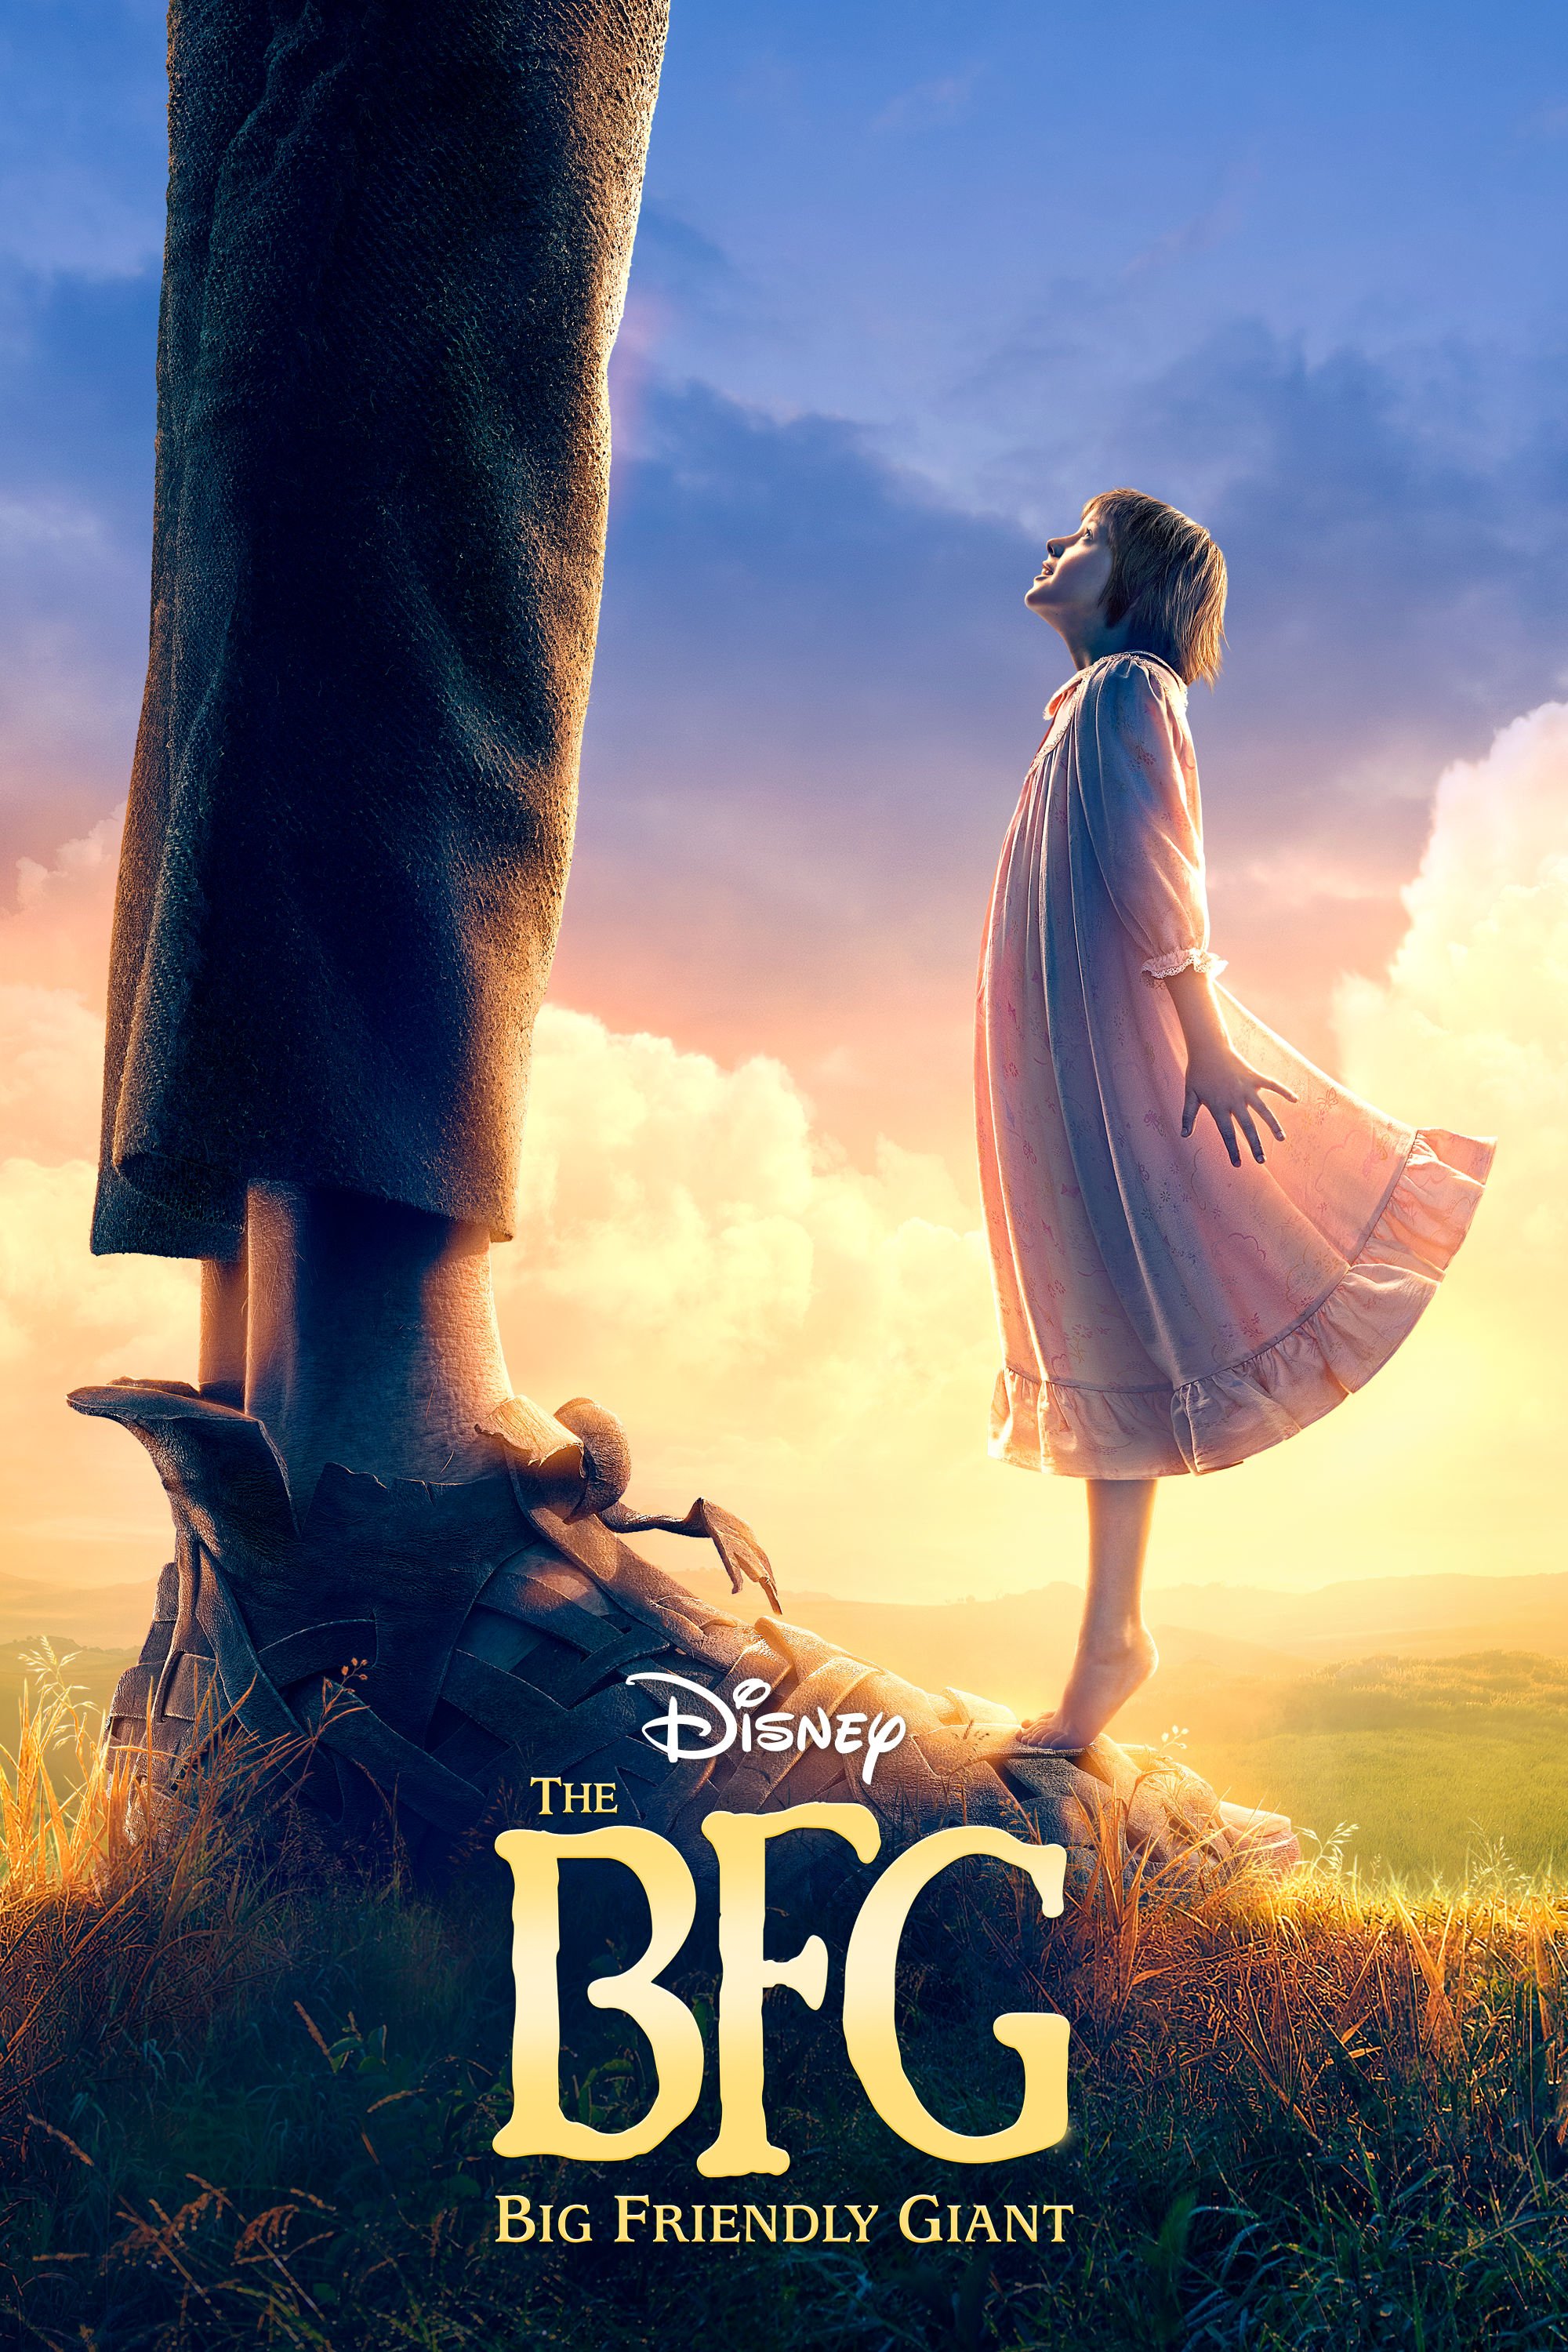 the-bfg-filming-locations-itunes-poster